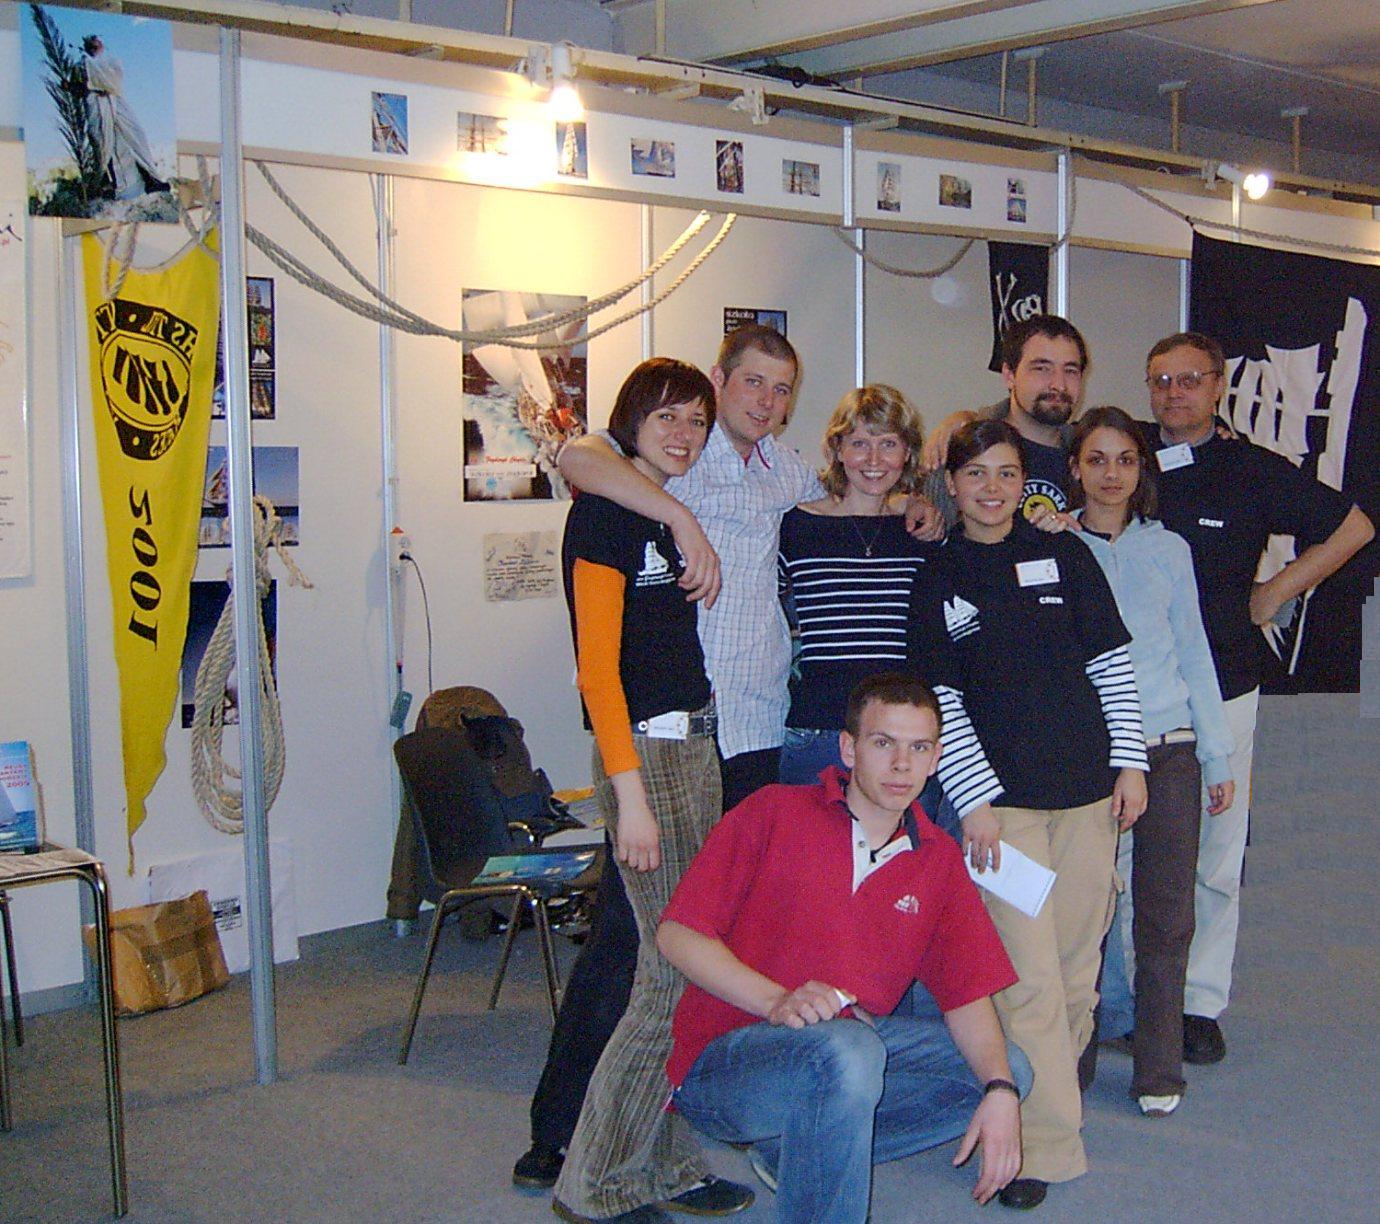 Brig Guild stand on Polyacht 2005 exhibition